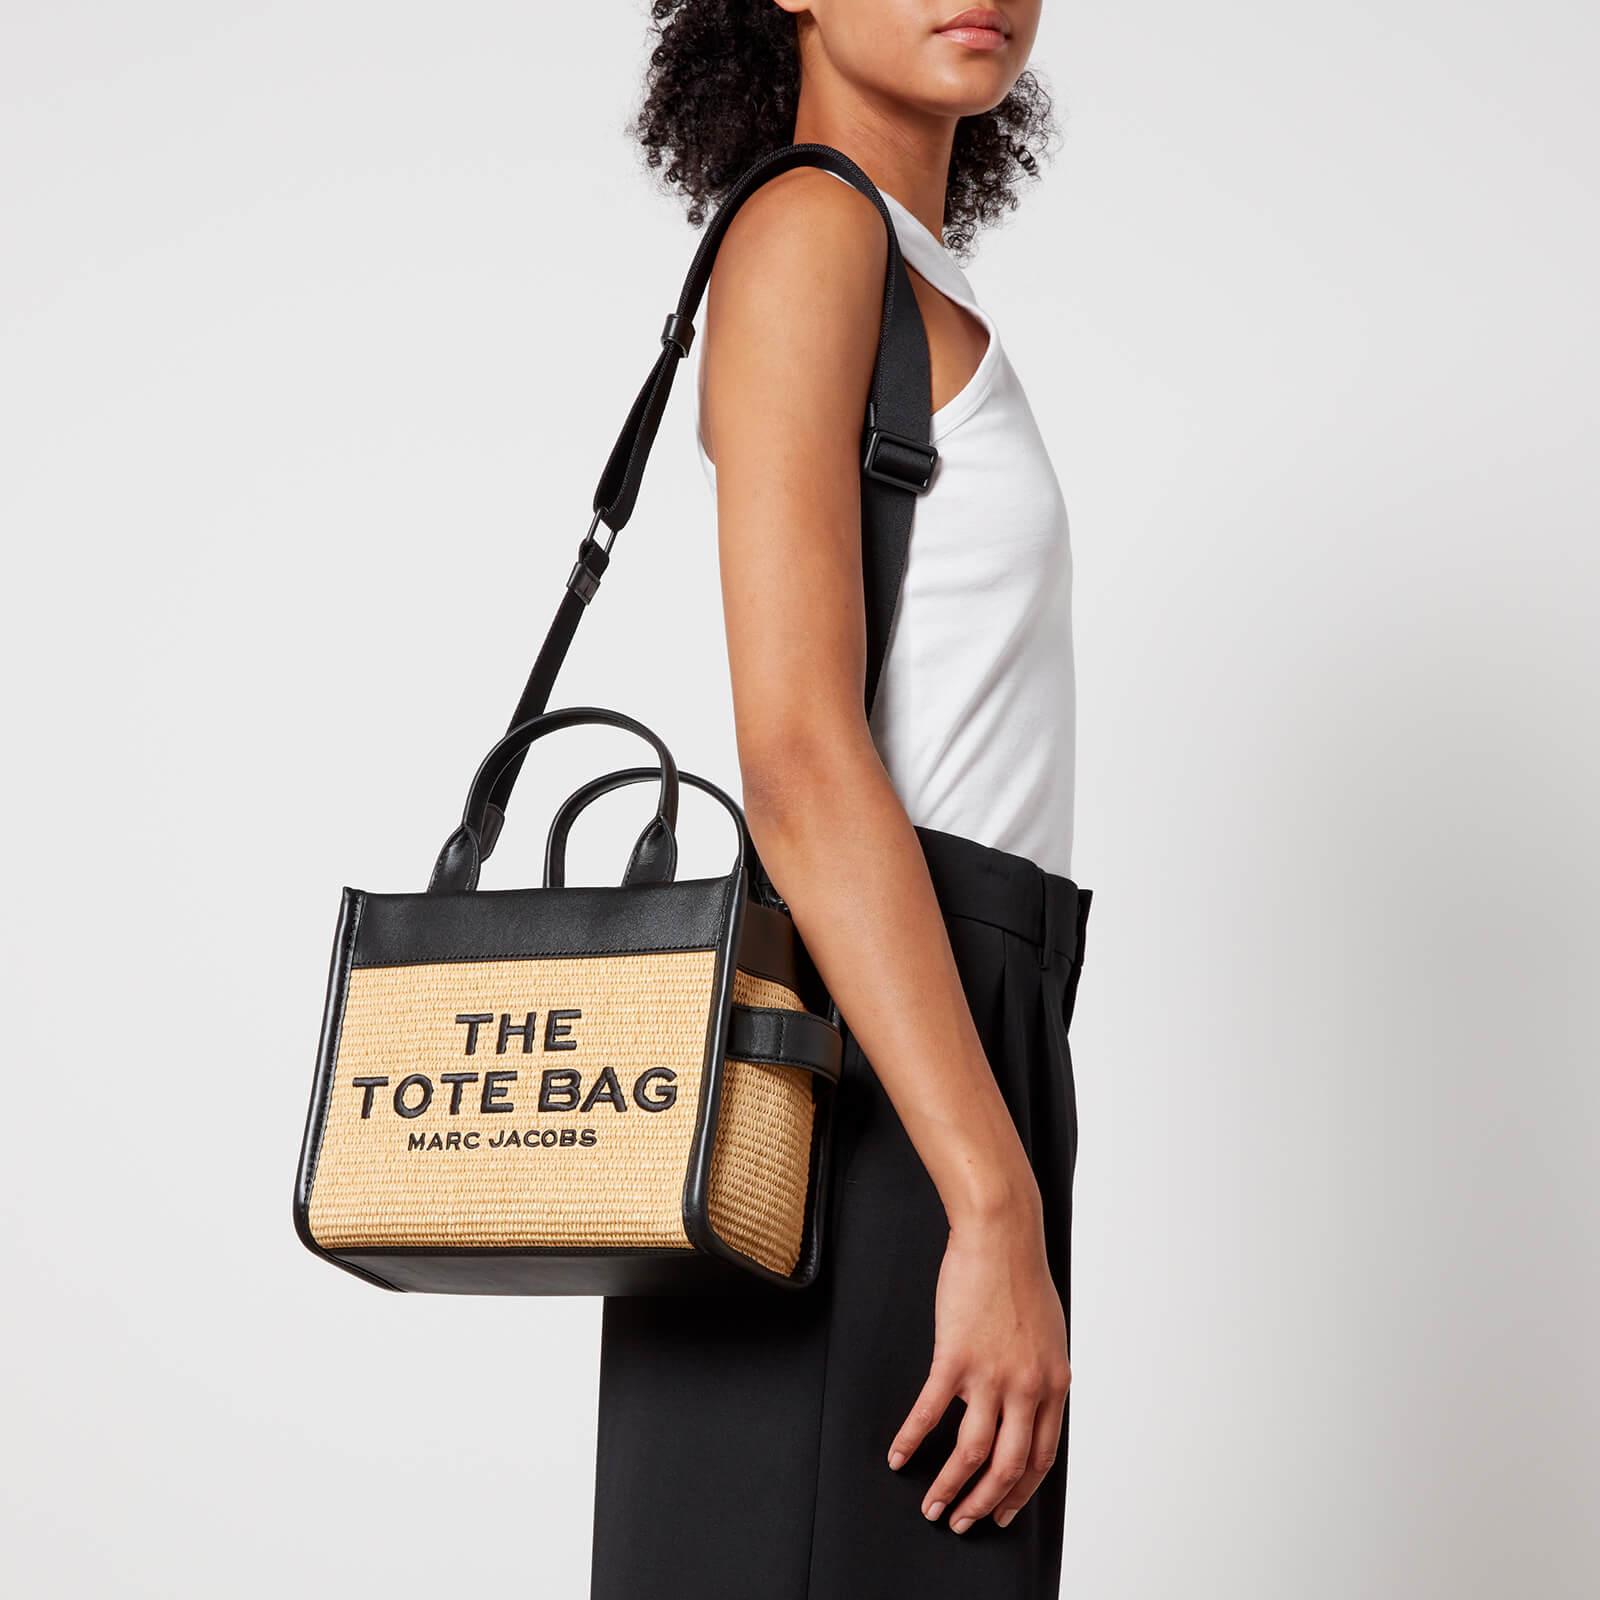 Women's The Small Tote Bag by Marc Jacobs